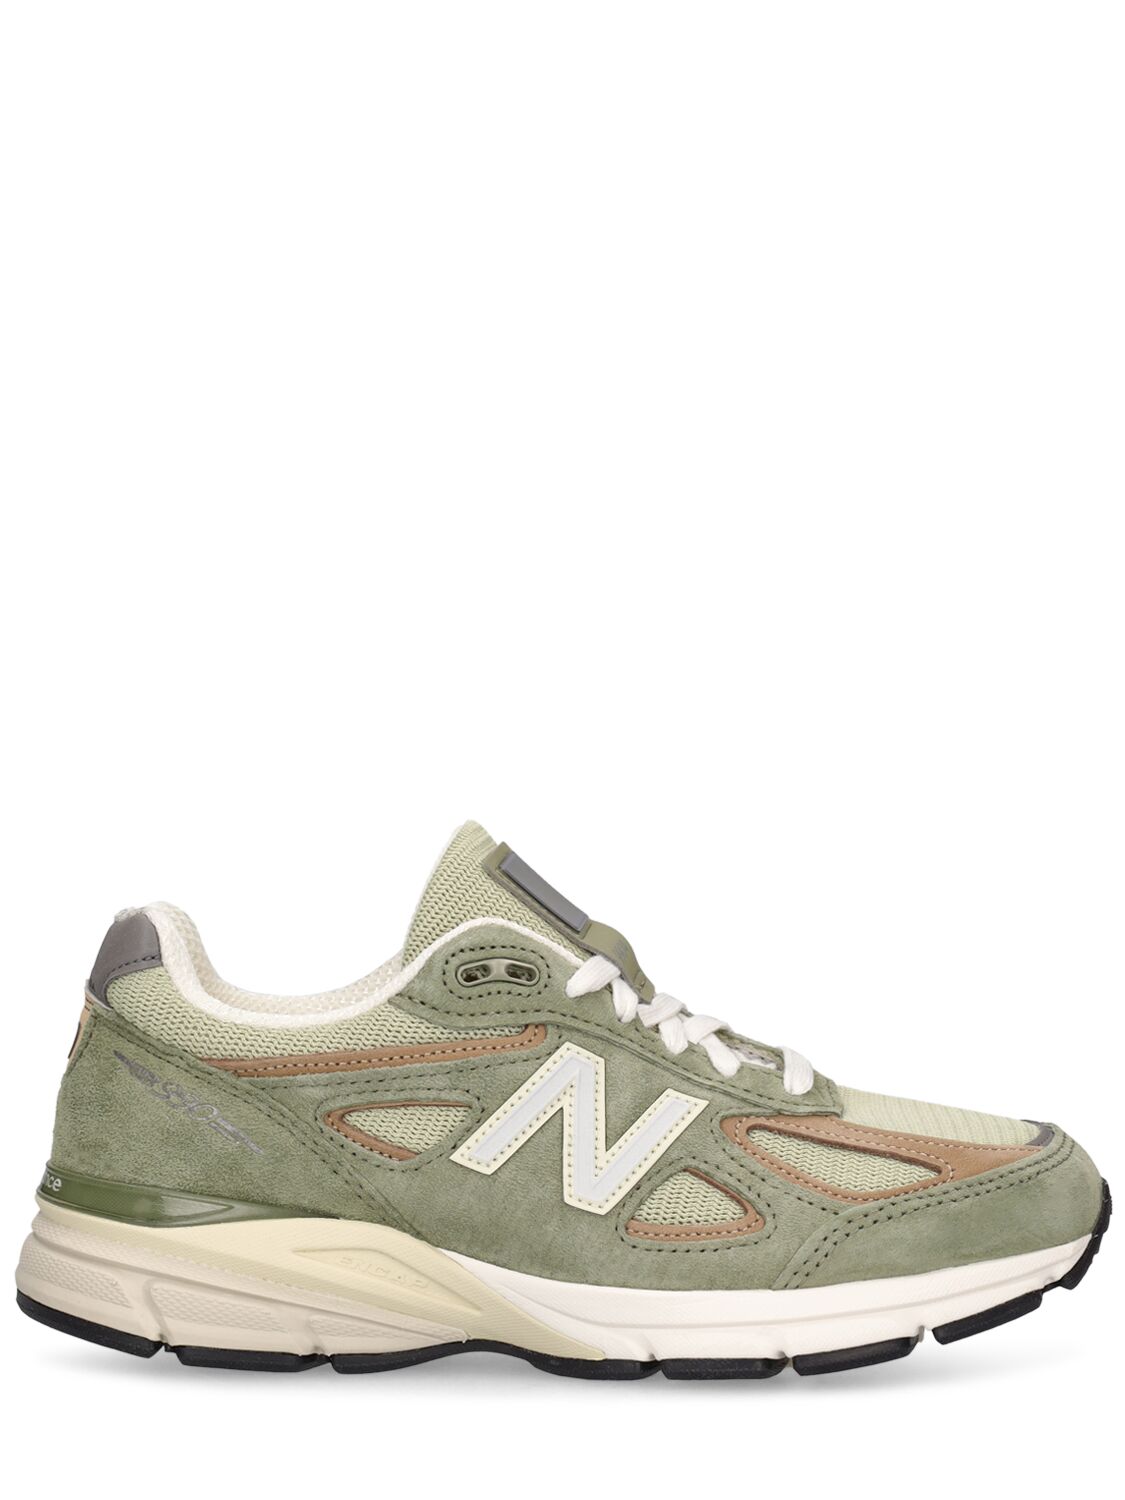 NEW BALANCE 990 MADE IN USA SNEAKERS